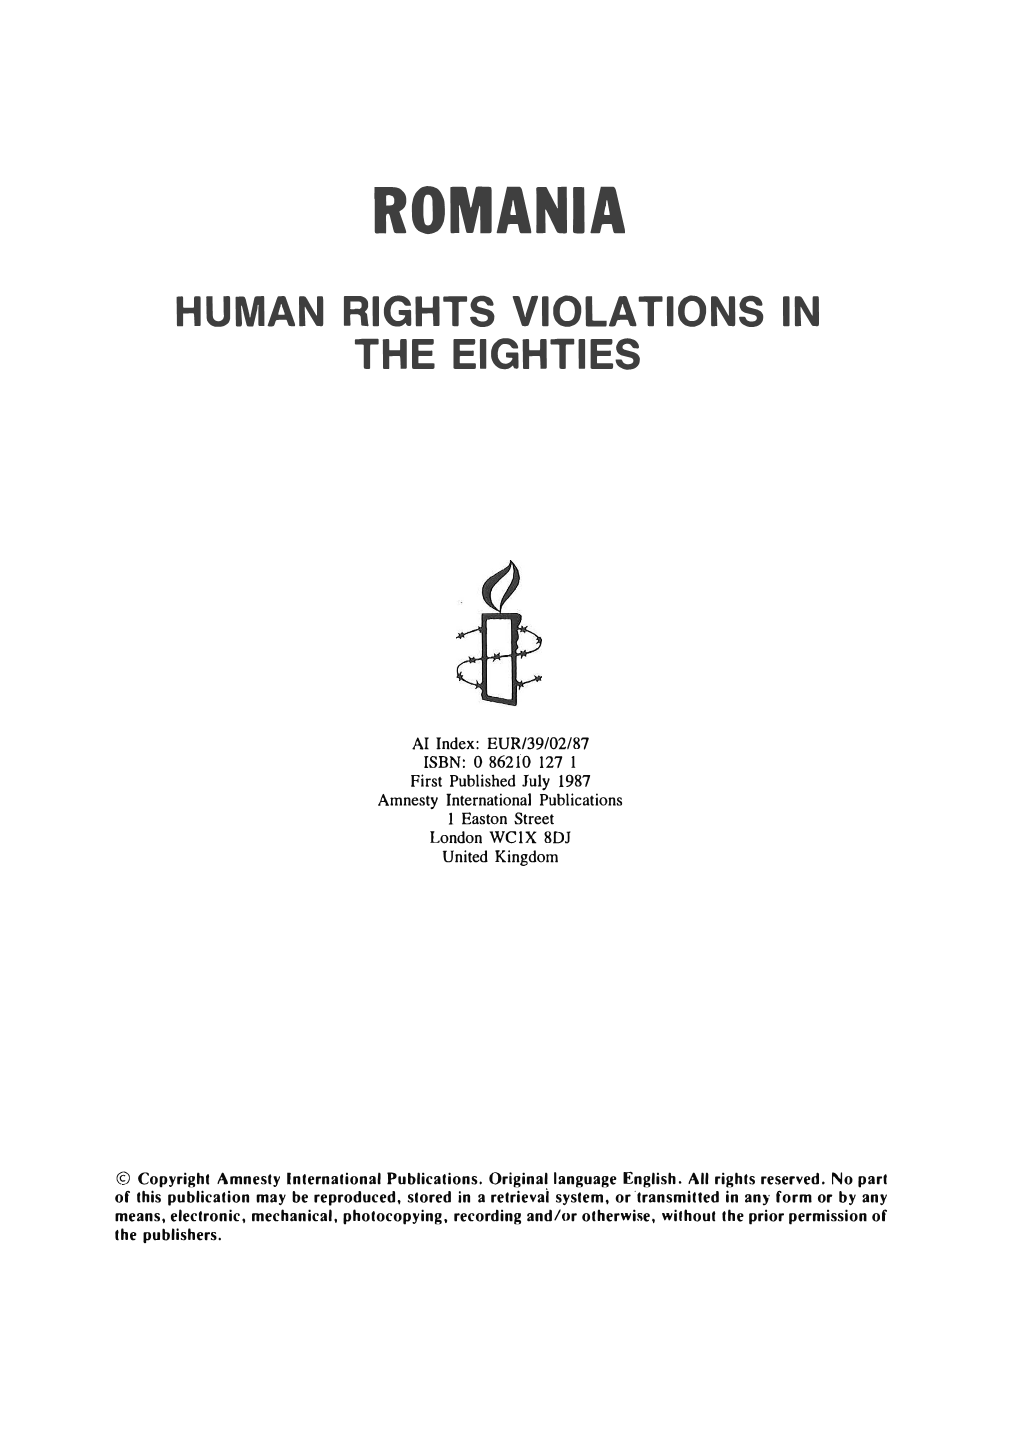 Romania Human Rights Violations in the Eighties